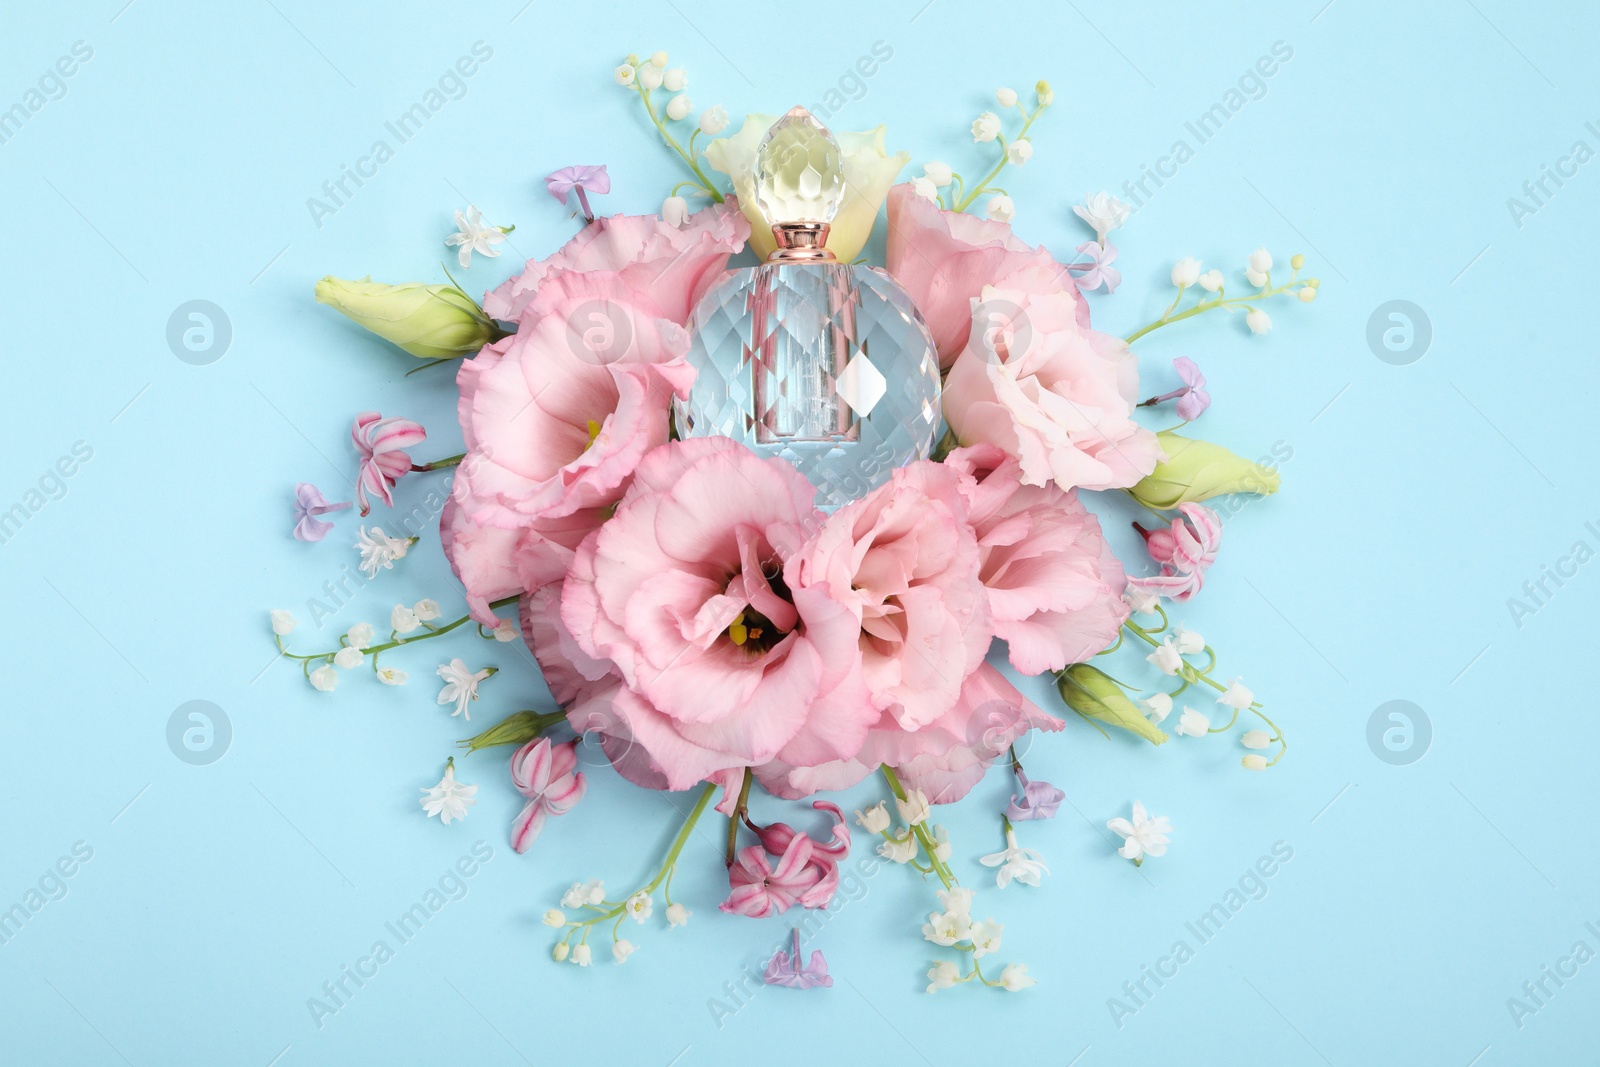 Photo of Luxury perfume and floral decor on light blue background, flat lay